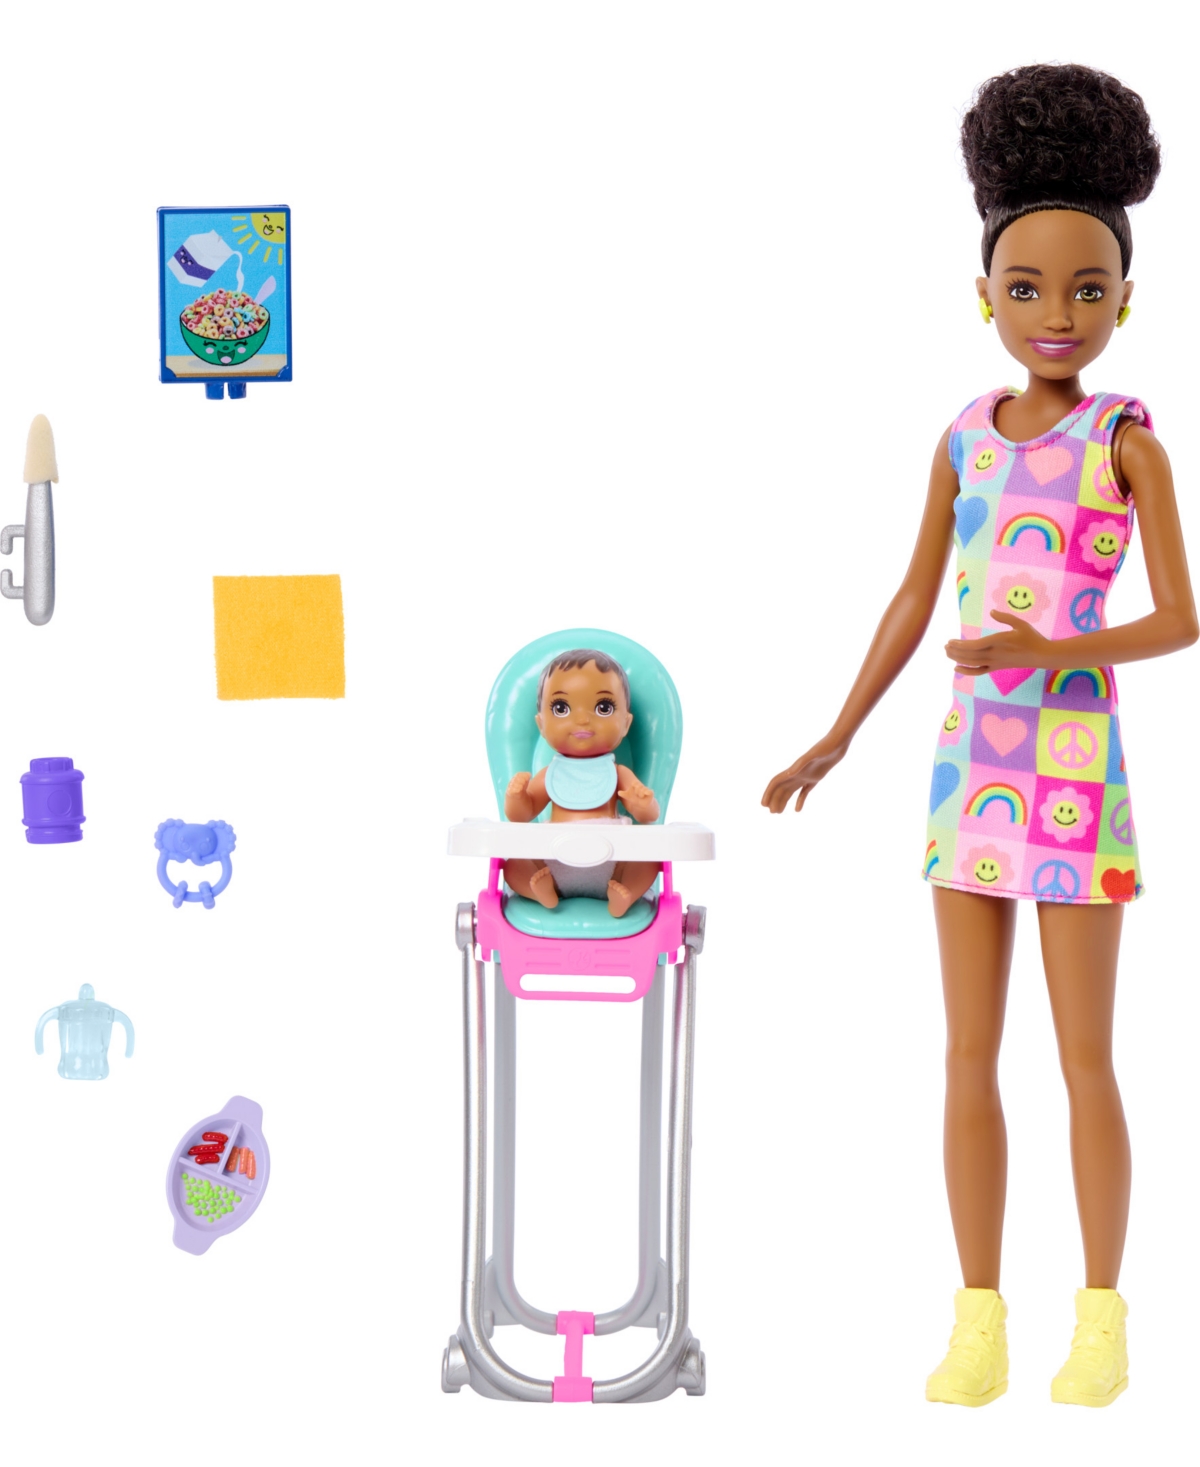 Barbie Skipper Babysitters Inc. And Play Set, Includes Doll With Black Hair, Baby, And Mealtime Accessories In Multi